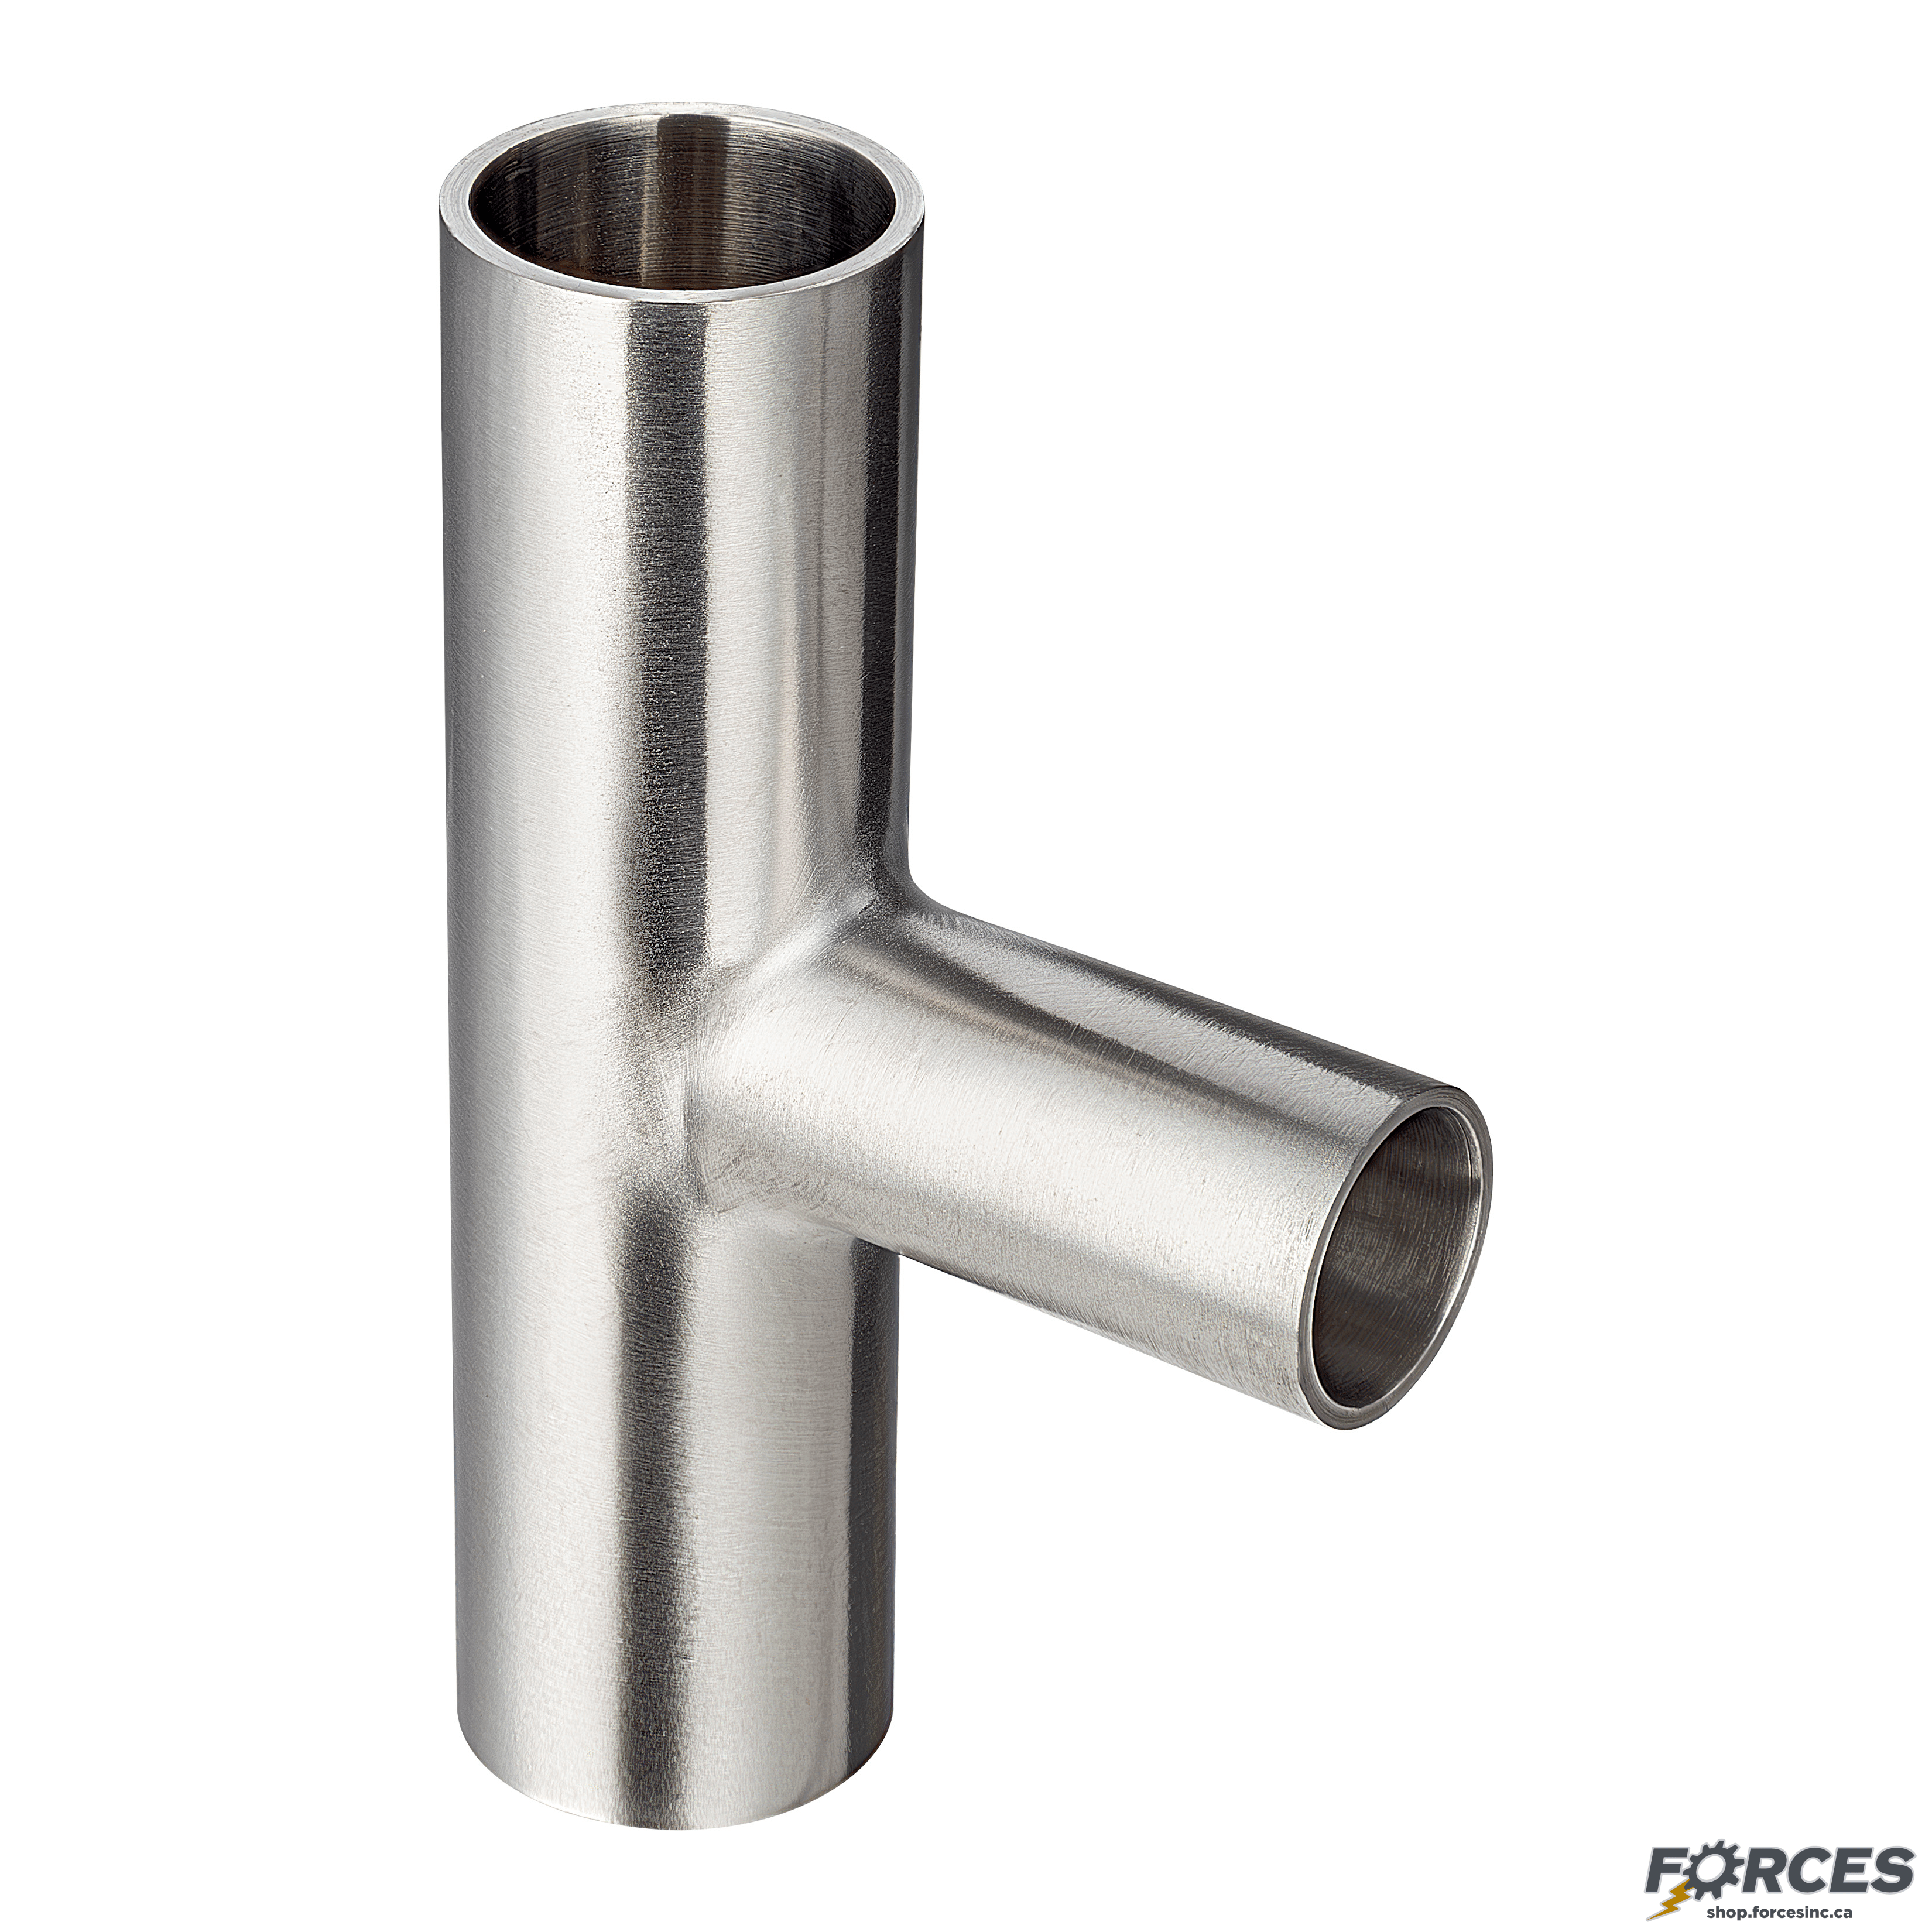 3" x 1-1/2" Butt Weld Tee Reducer - Stainless Steel 304 - Forces Inc